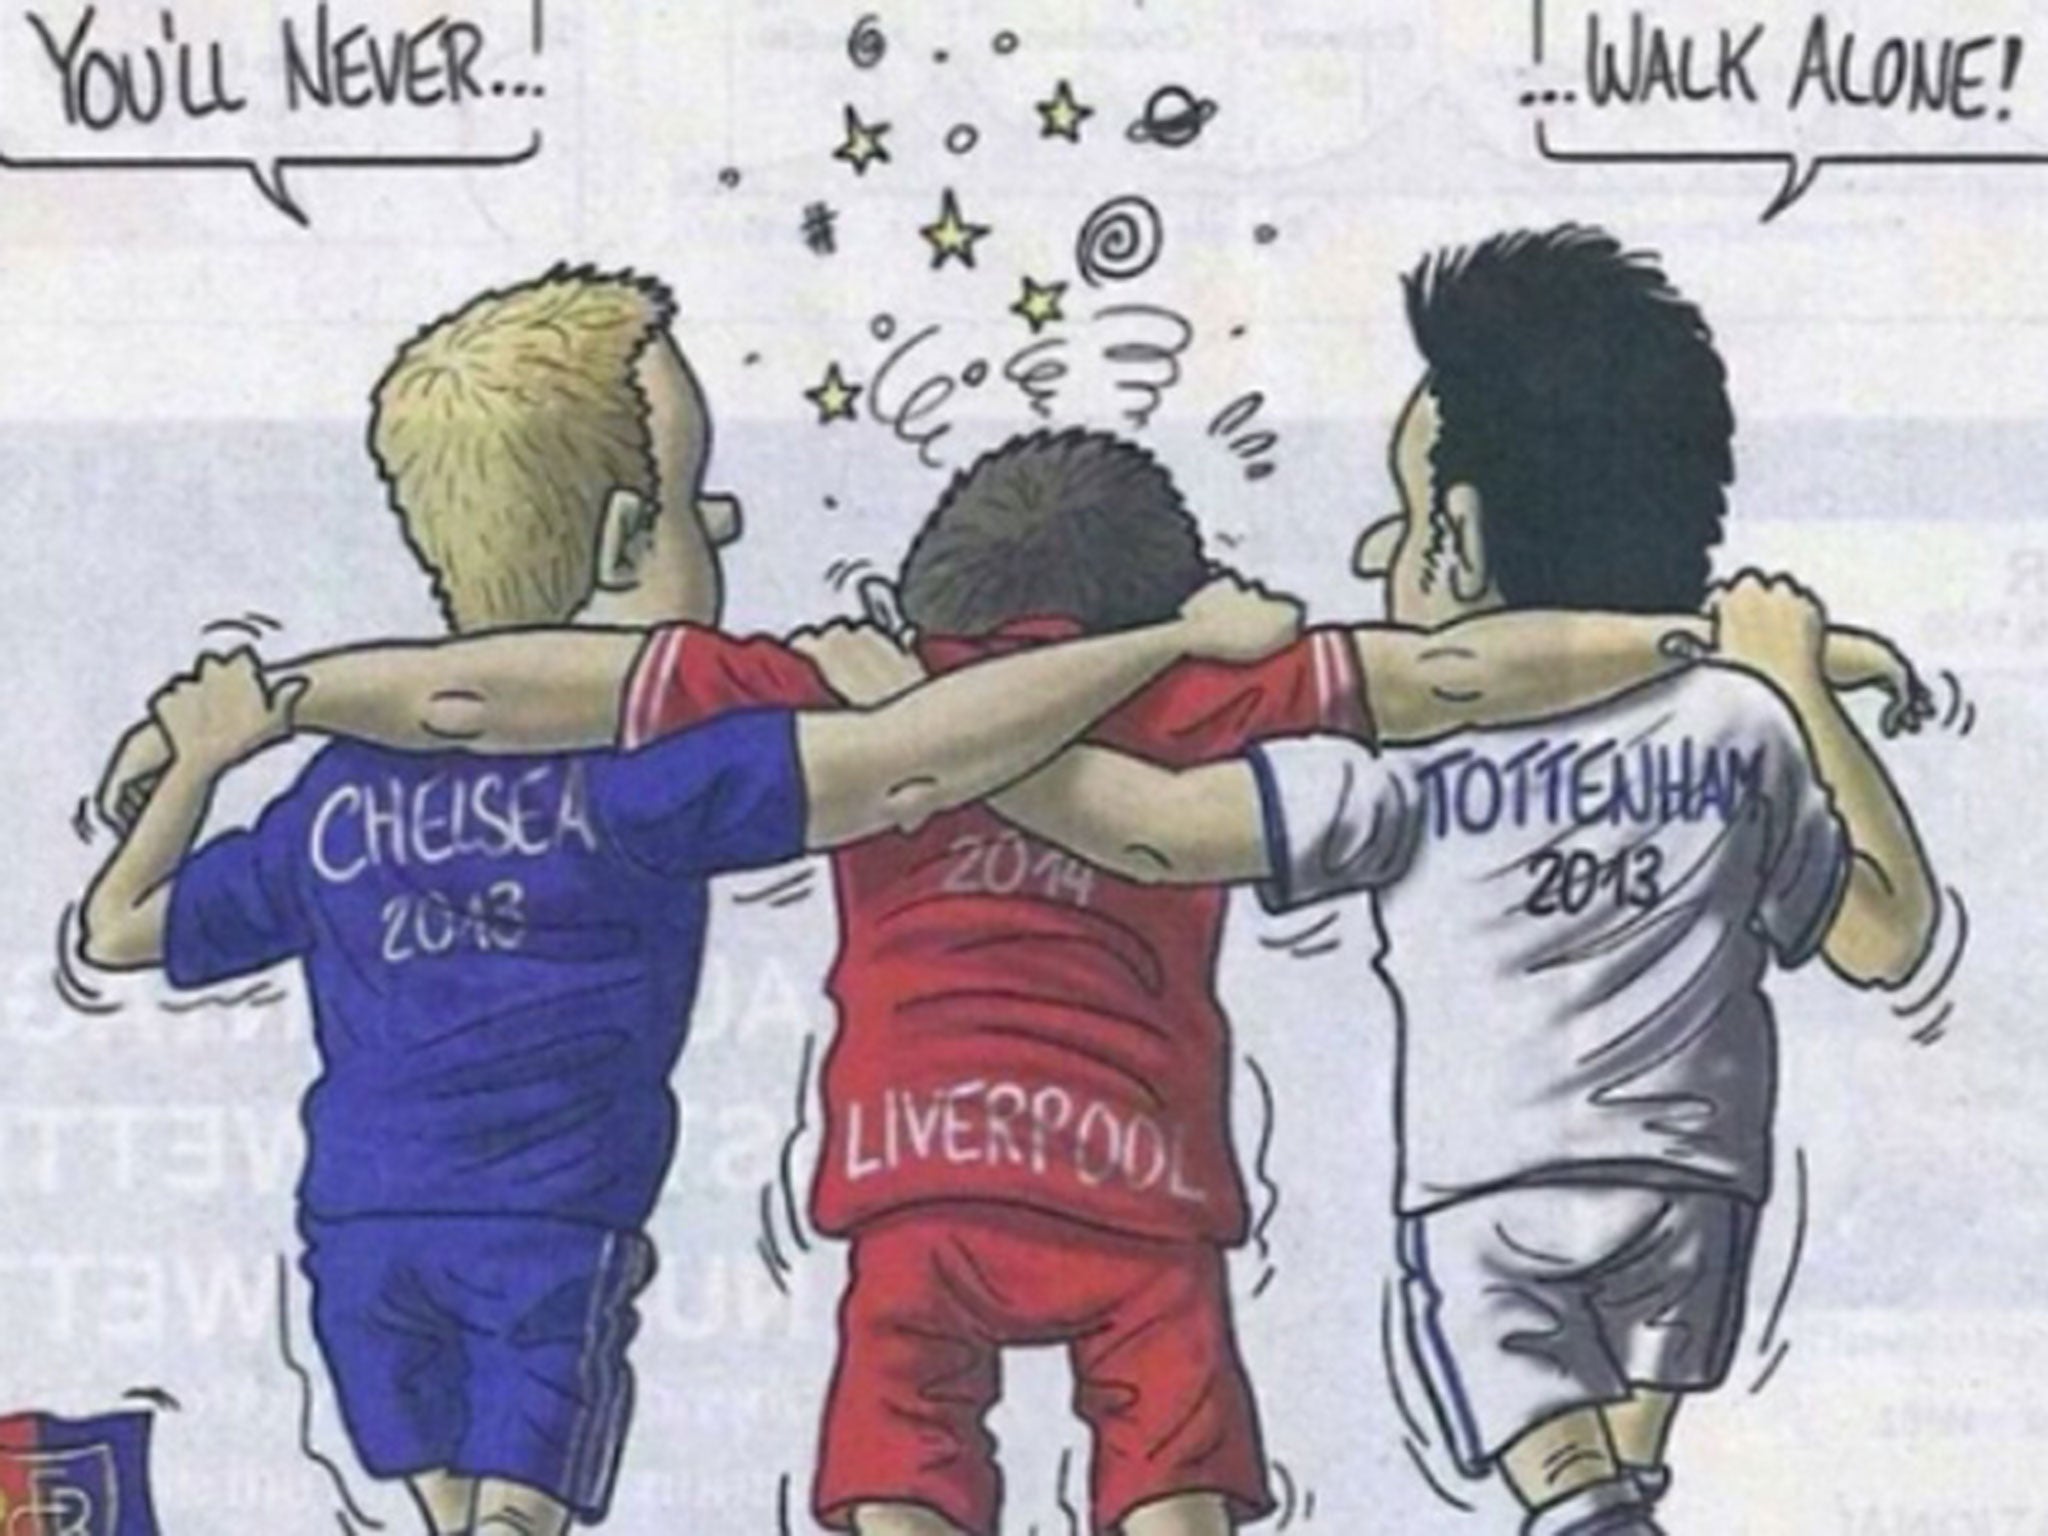 Basel's picture posted on their Instagram mocking Chelsea, Liverpool and Tottenham